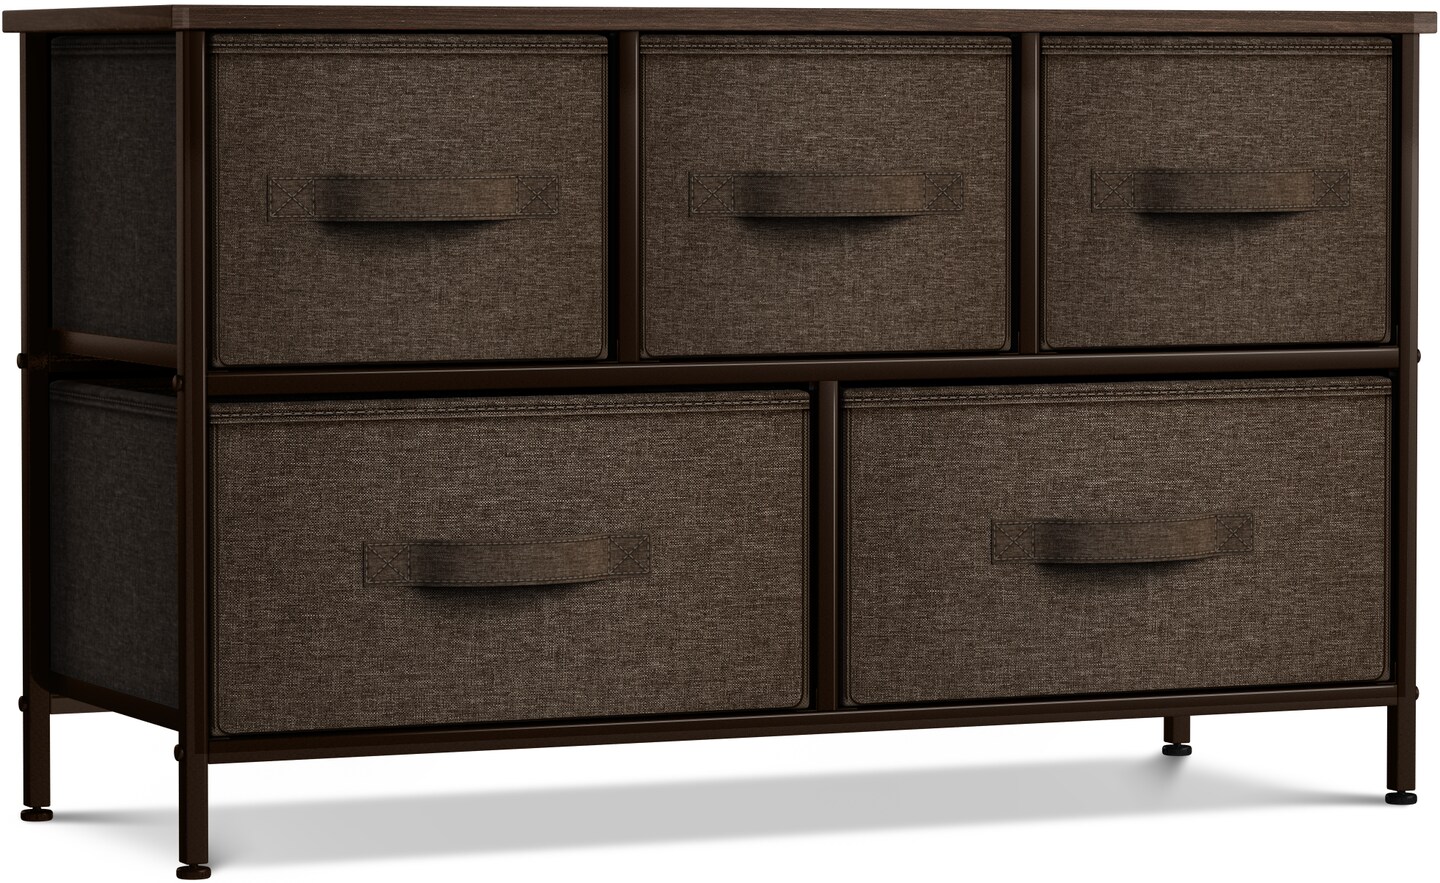 Fabric Dresser with 5 Drawers, Wide Dresser Storage Tower, Organizer Unit  with Wood Top and Easy Pull Handle for Closets, Living Room, Nursery Room